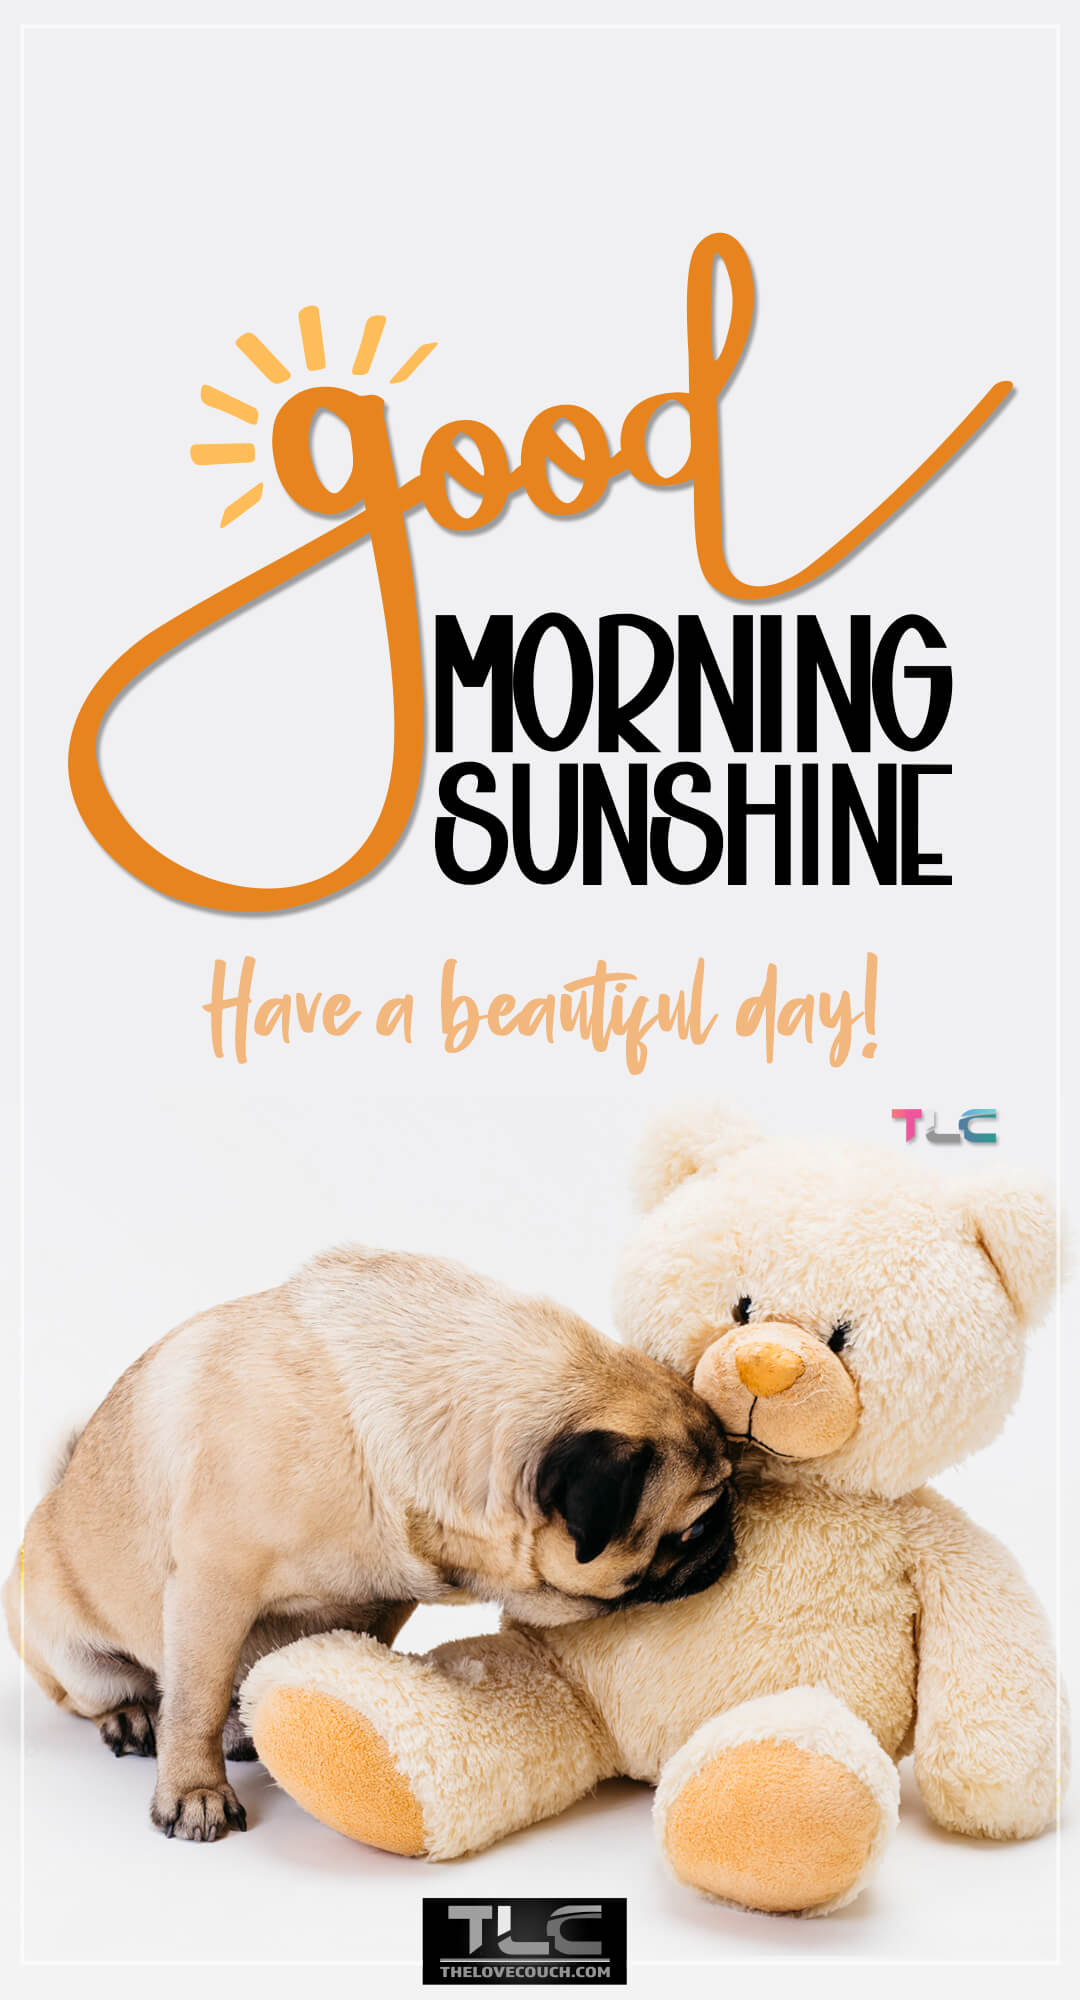 Good Morning Images - Cute pug sniffing big fawn teddy bear - Have a beautiful day